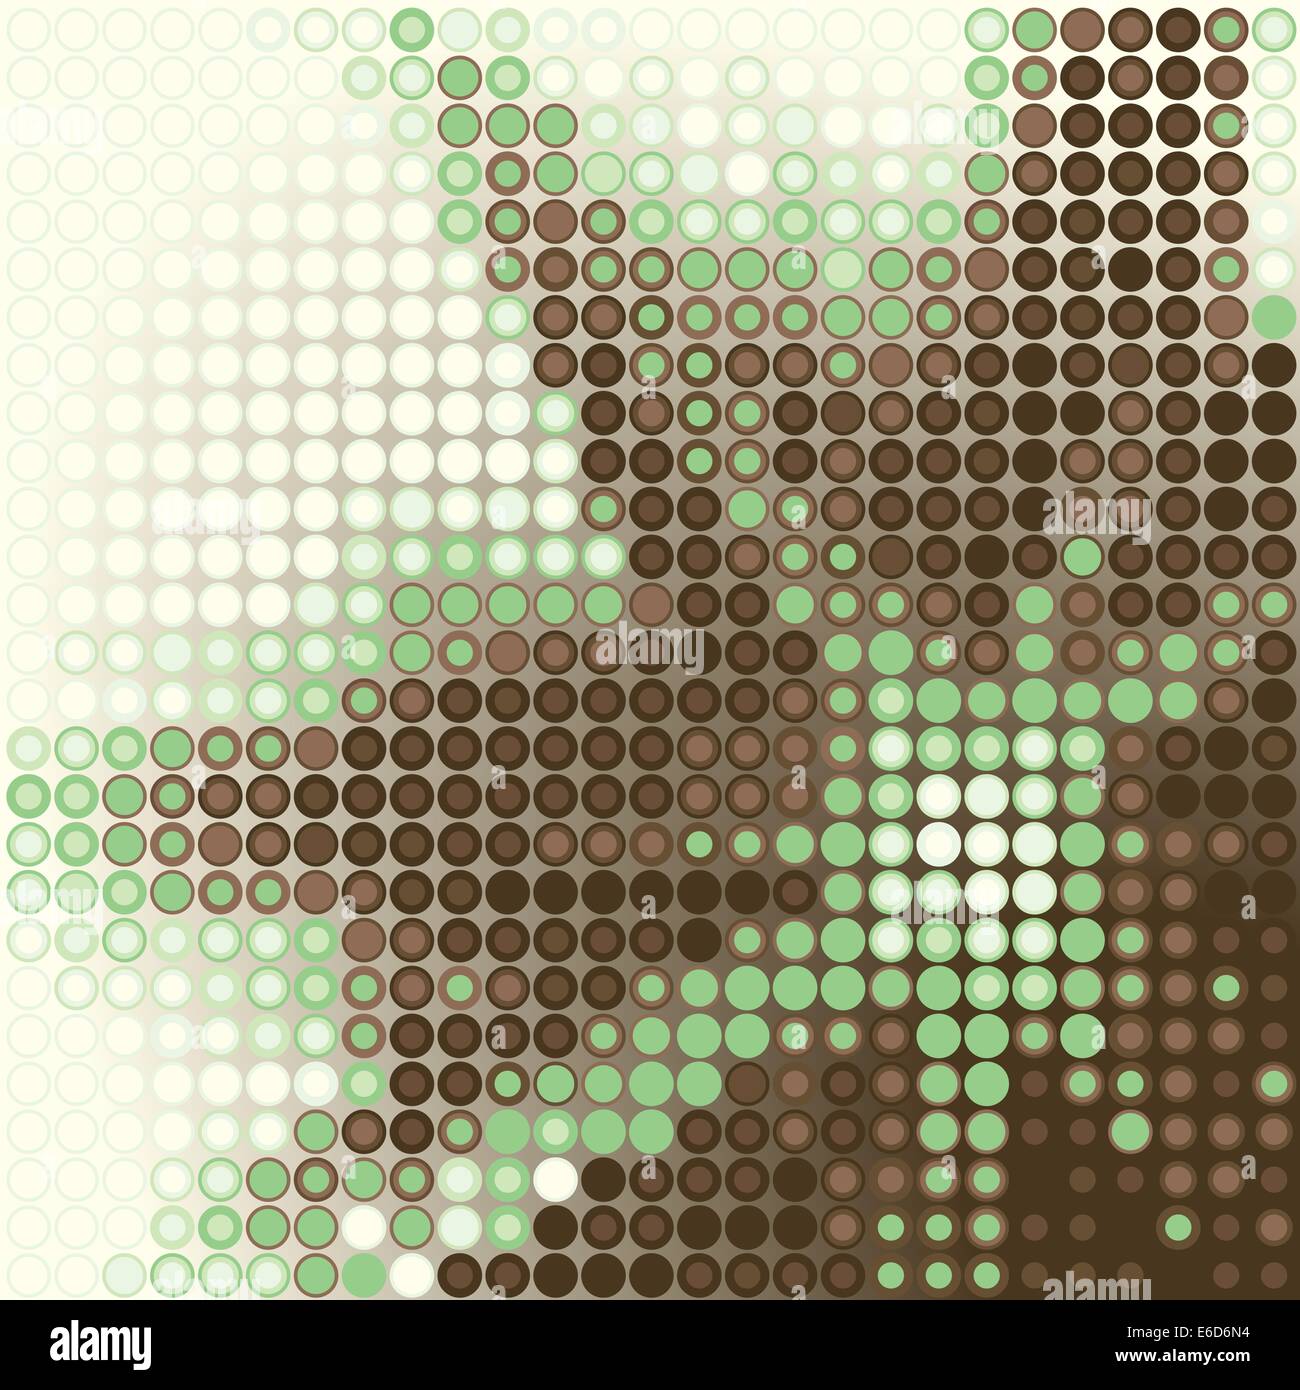 Abstract vector background of a green brown star shape Stock Vector